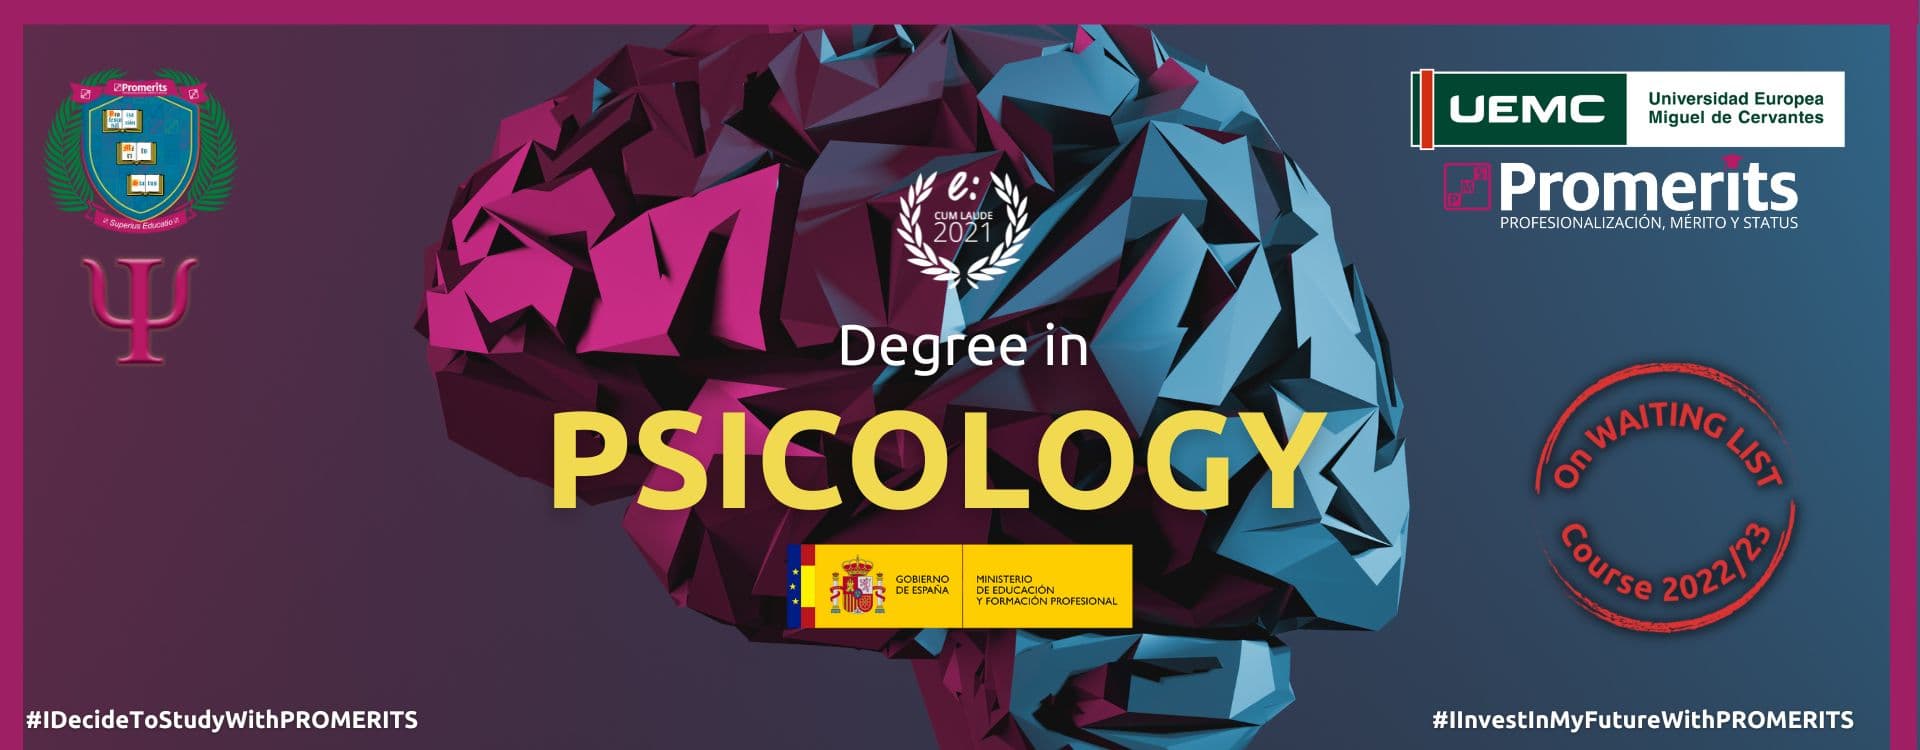 Degree in Psicology